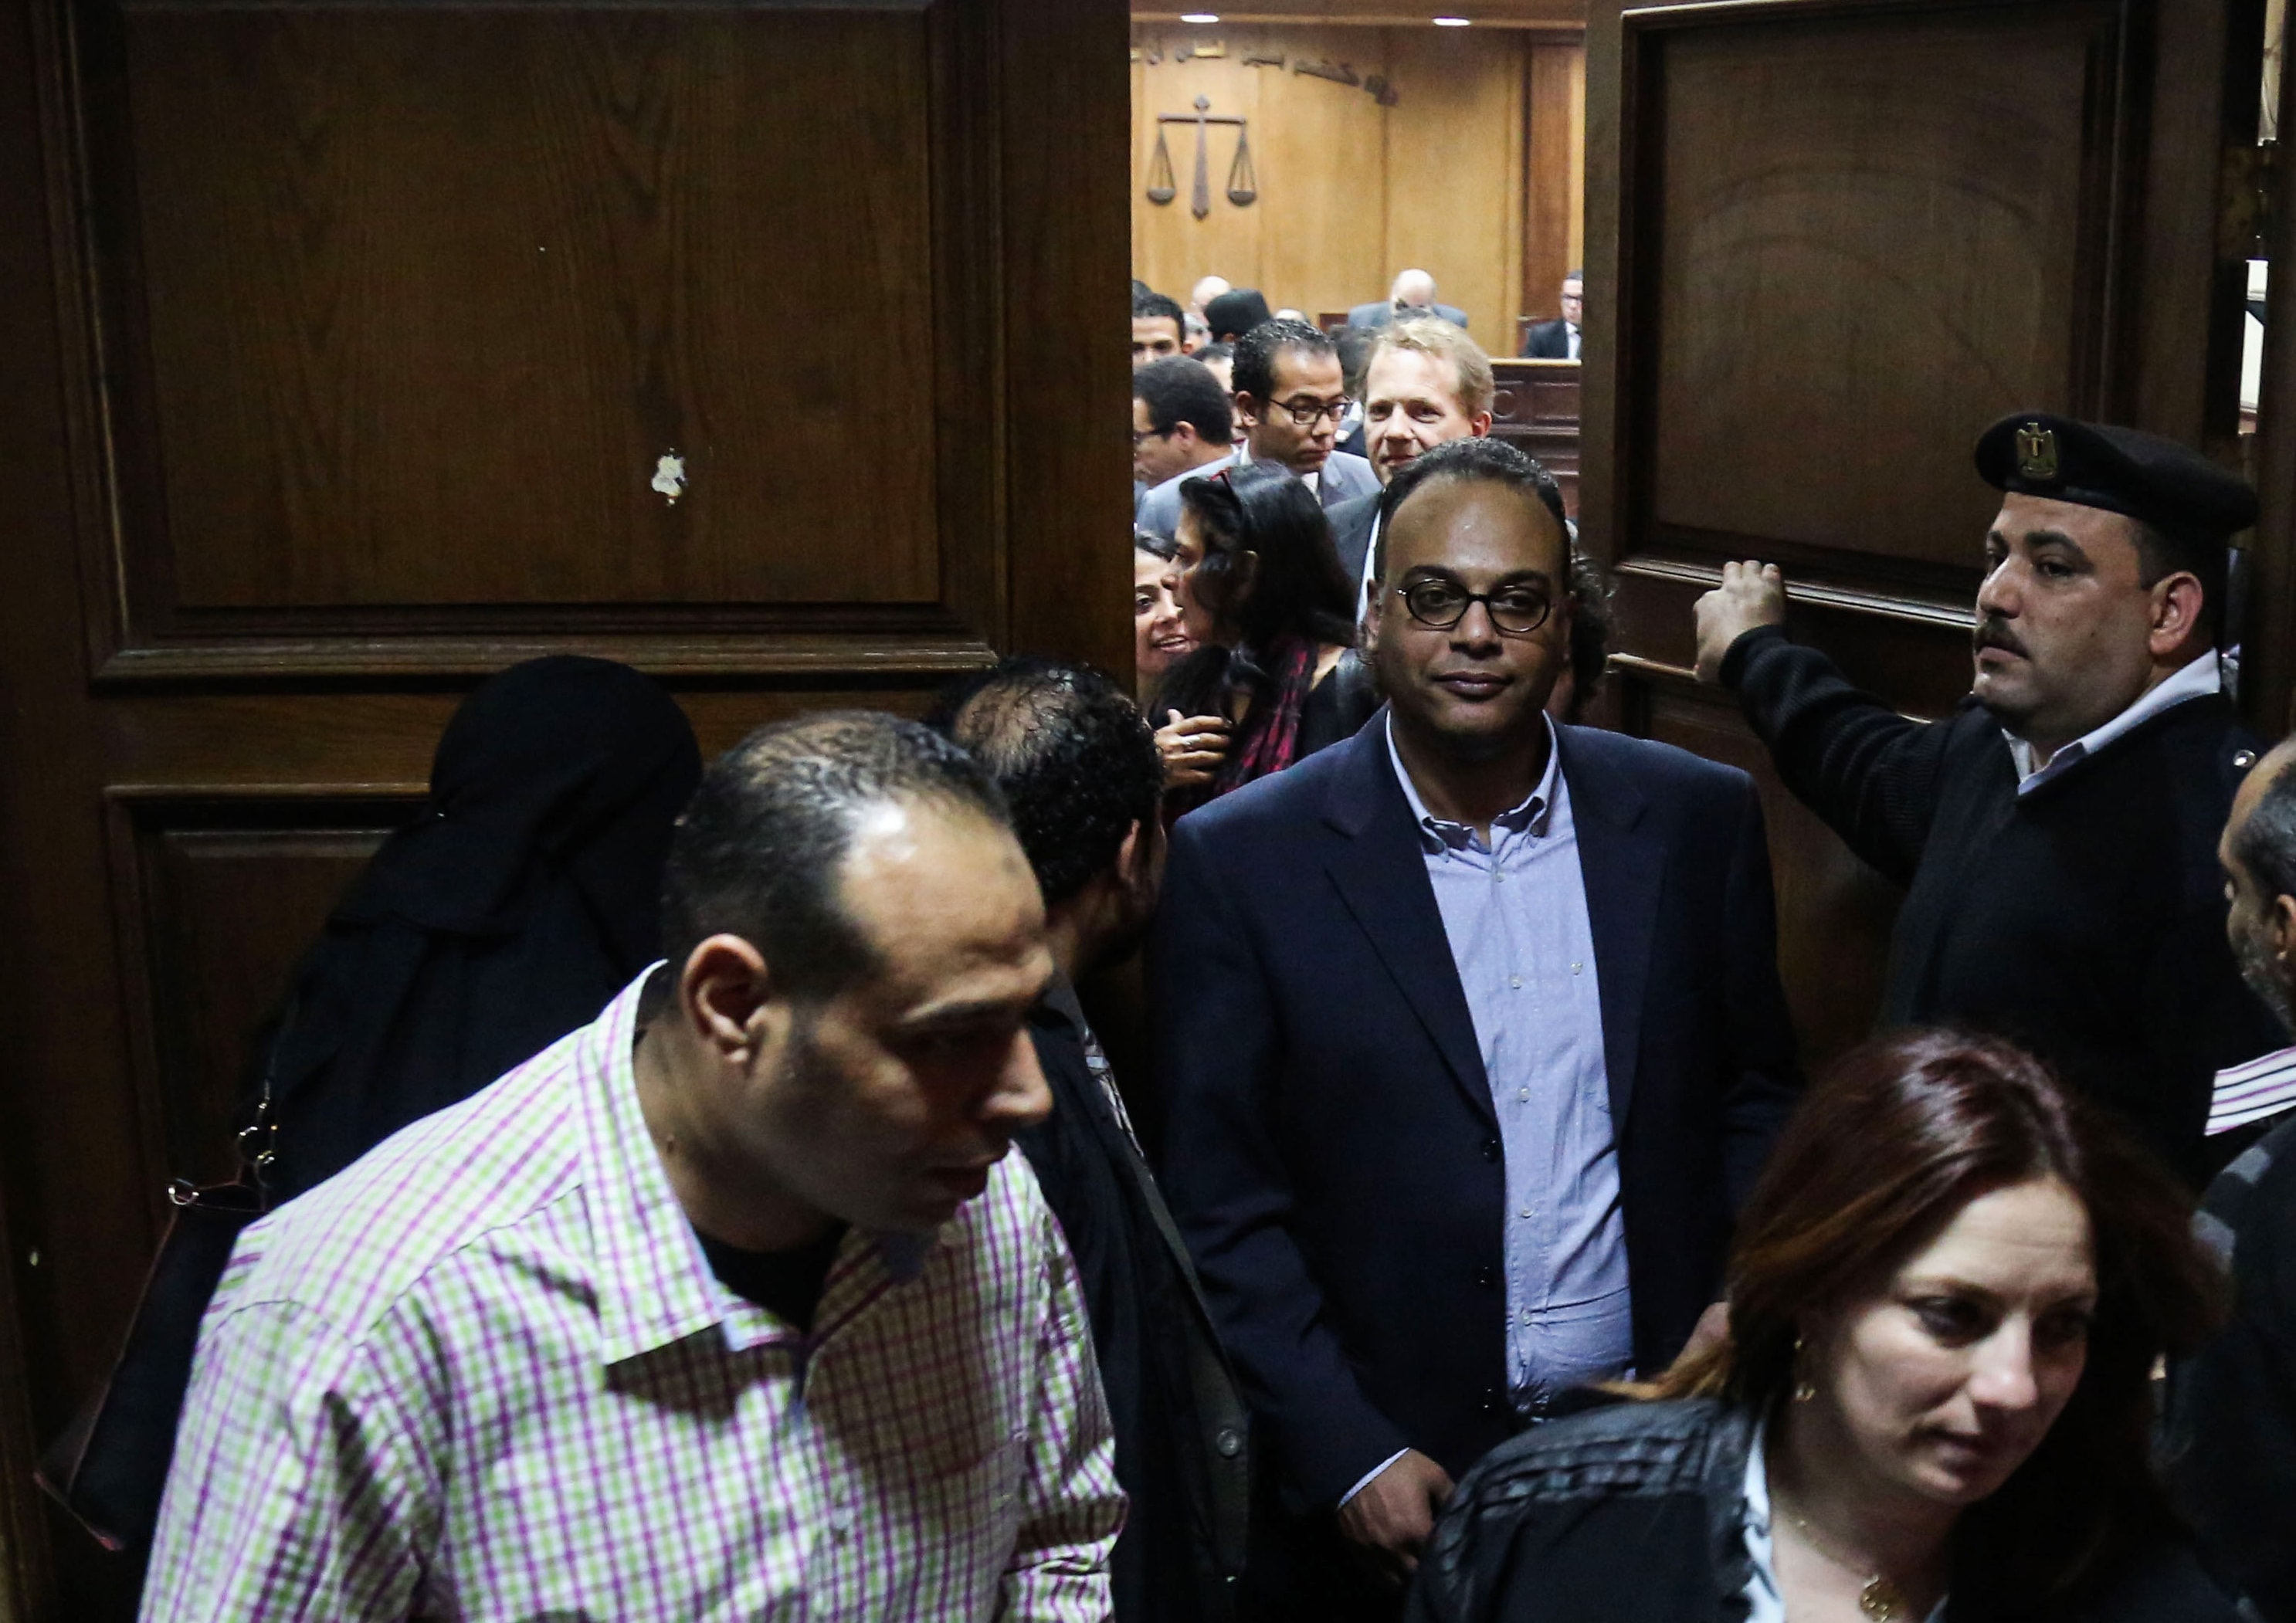 Investigative journalist Hossam Baghat, center, leaves a courtroom at the Cairo Criminal Court after the court postponed a decision on whether to implement an order to freeze his assets over allegations of illegal foreign funding, in Cairo, Egypt Thursday, March 24, 2016., AP Photo/Mohamed Elraai